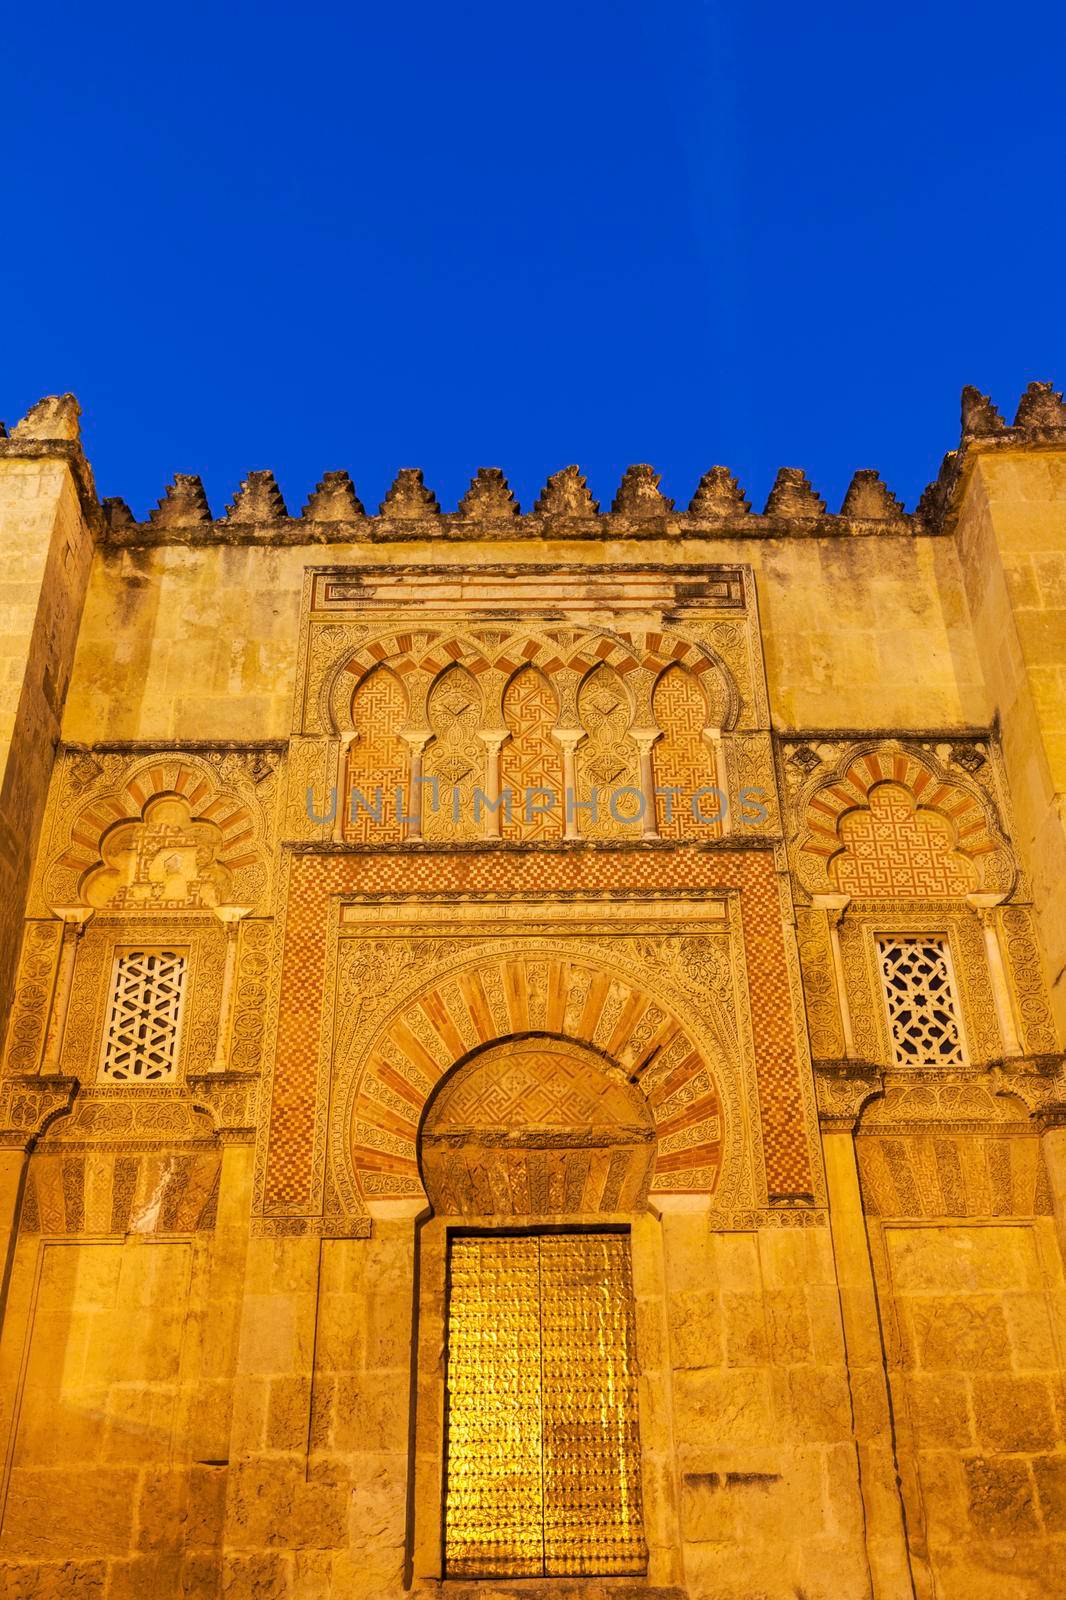 The Mosque–Cathedral of Cordoba. Cordoba, Andalusia, Spain.